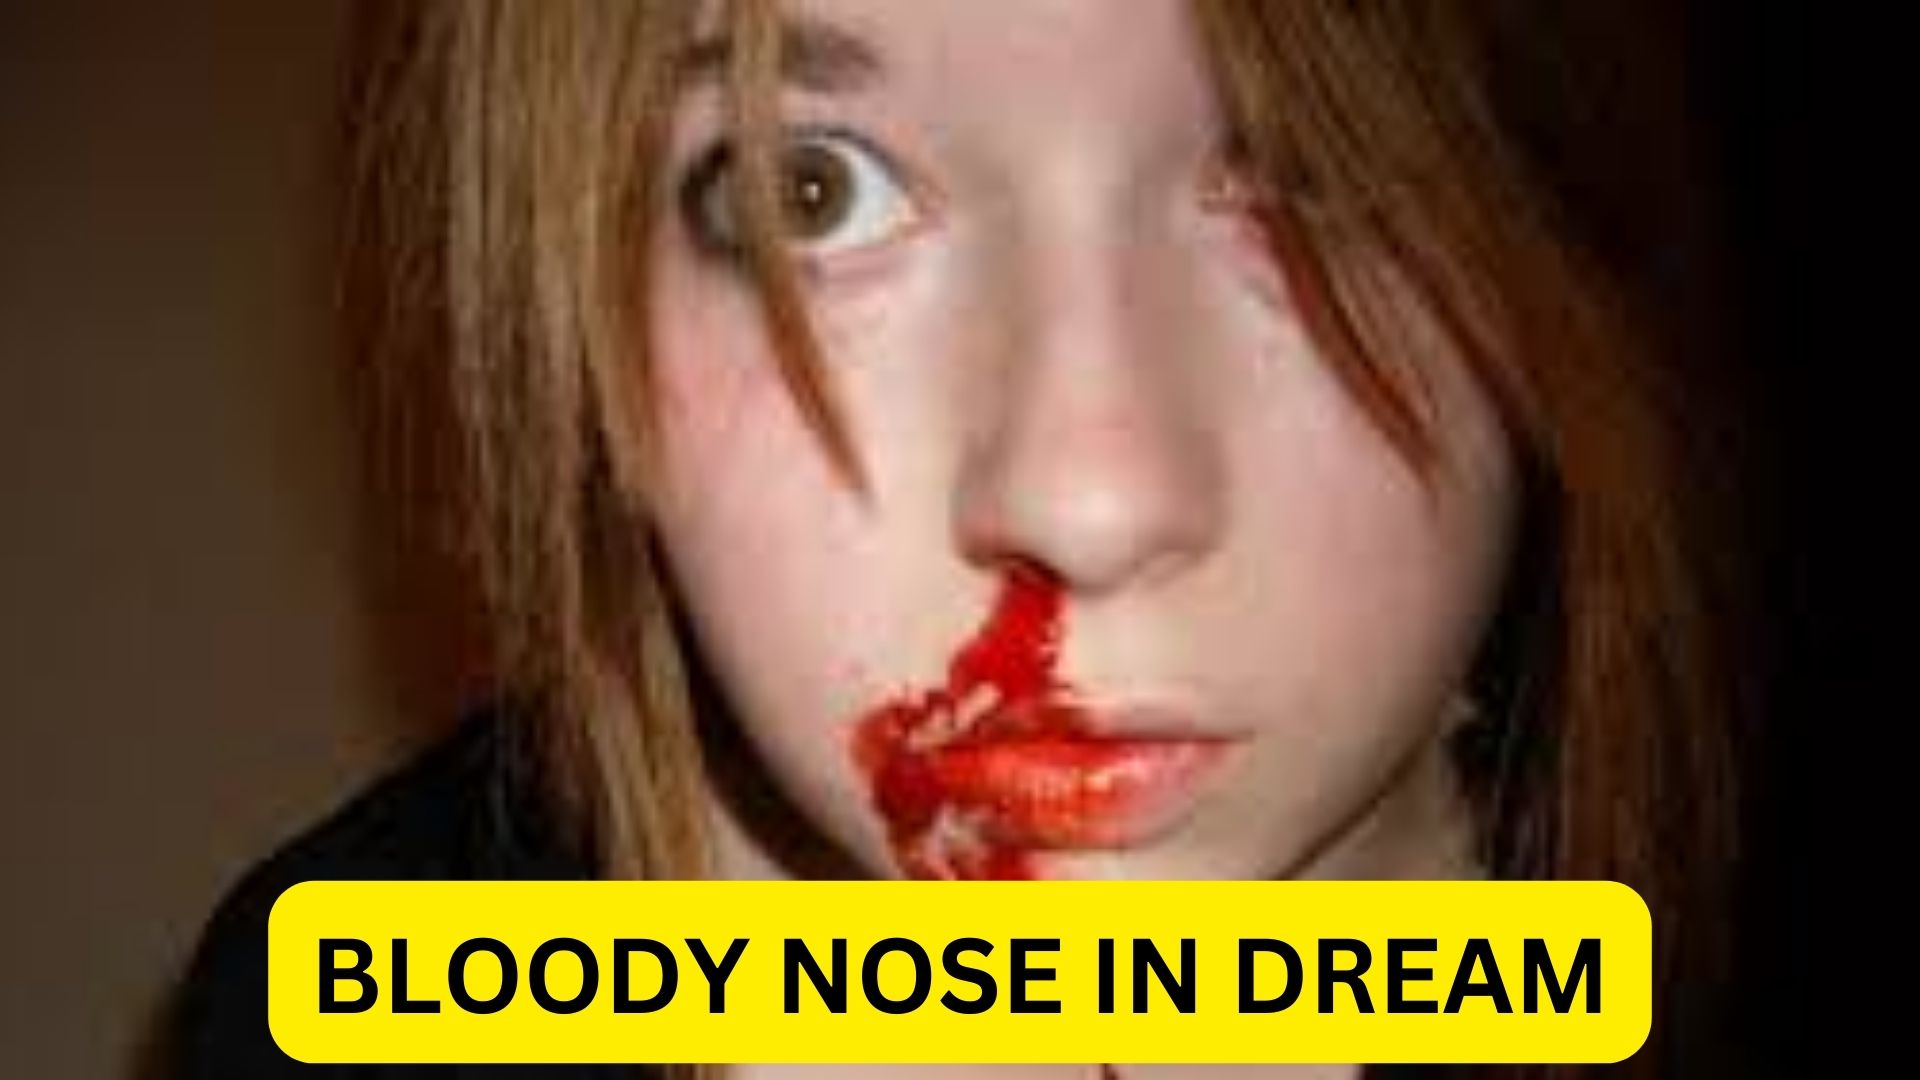 Bloody Nose In Dream - A Misfortune In Your Conscious Hours